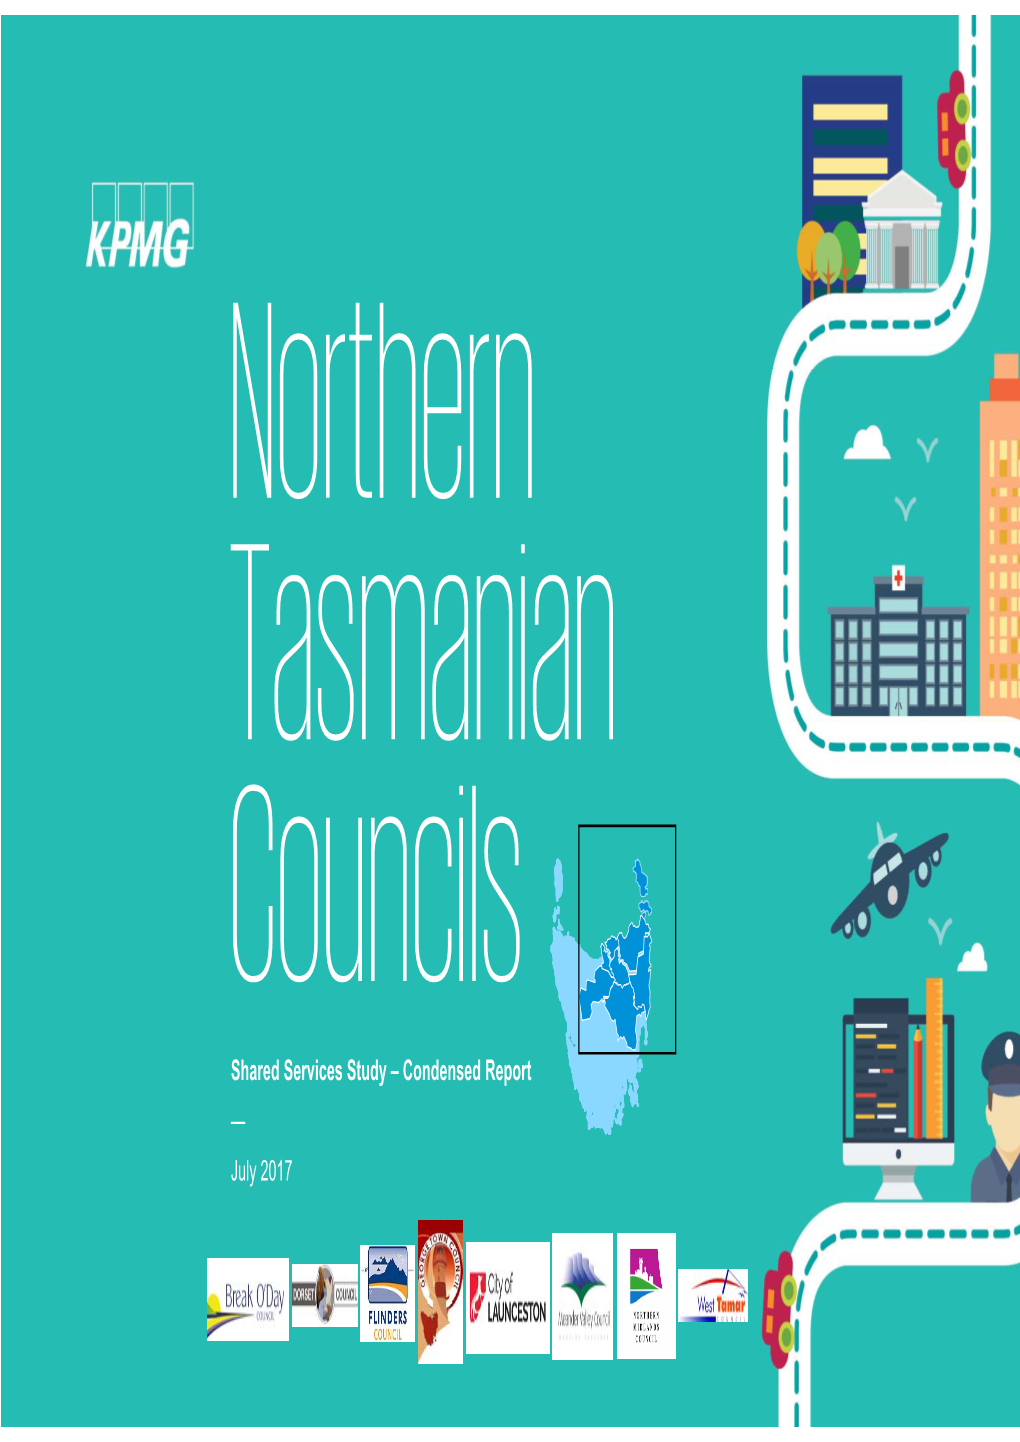 KPMG Northern Tasmanian Councils Shared Services Study Condensed